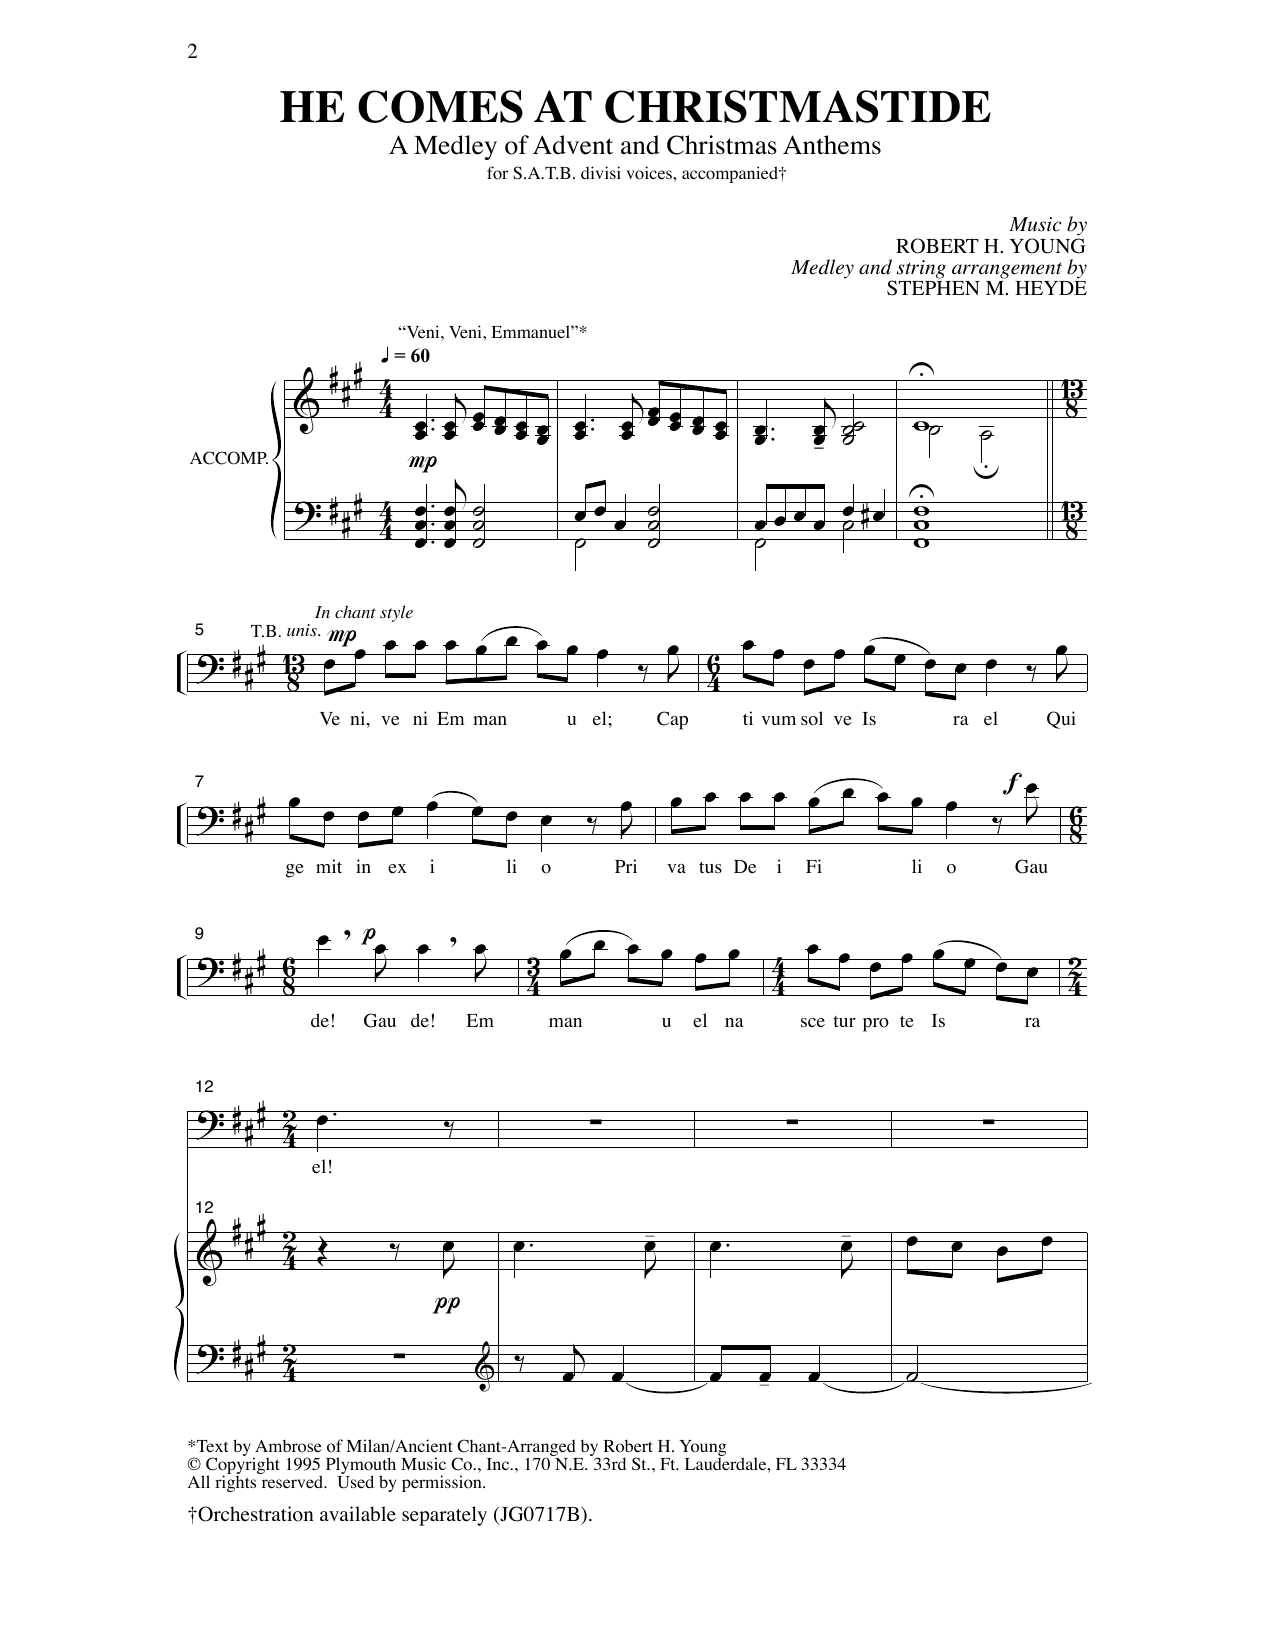 Robert Young He Comes At Christmastide (arr. Stephen Heyde) sheet music notes printable PDF score